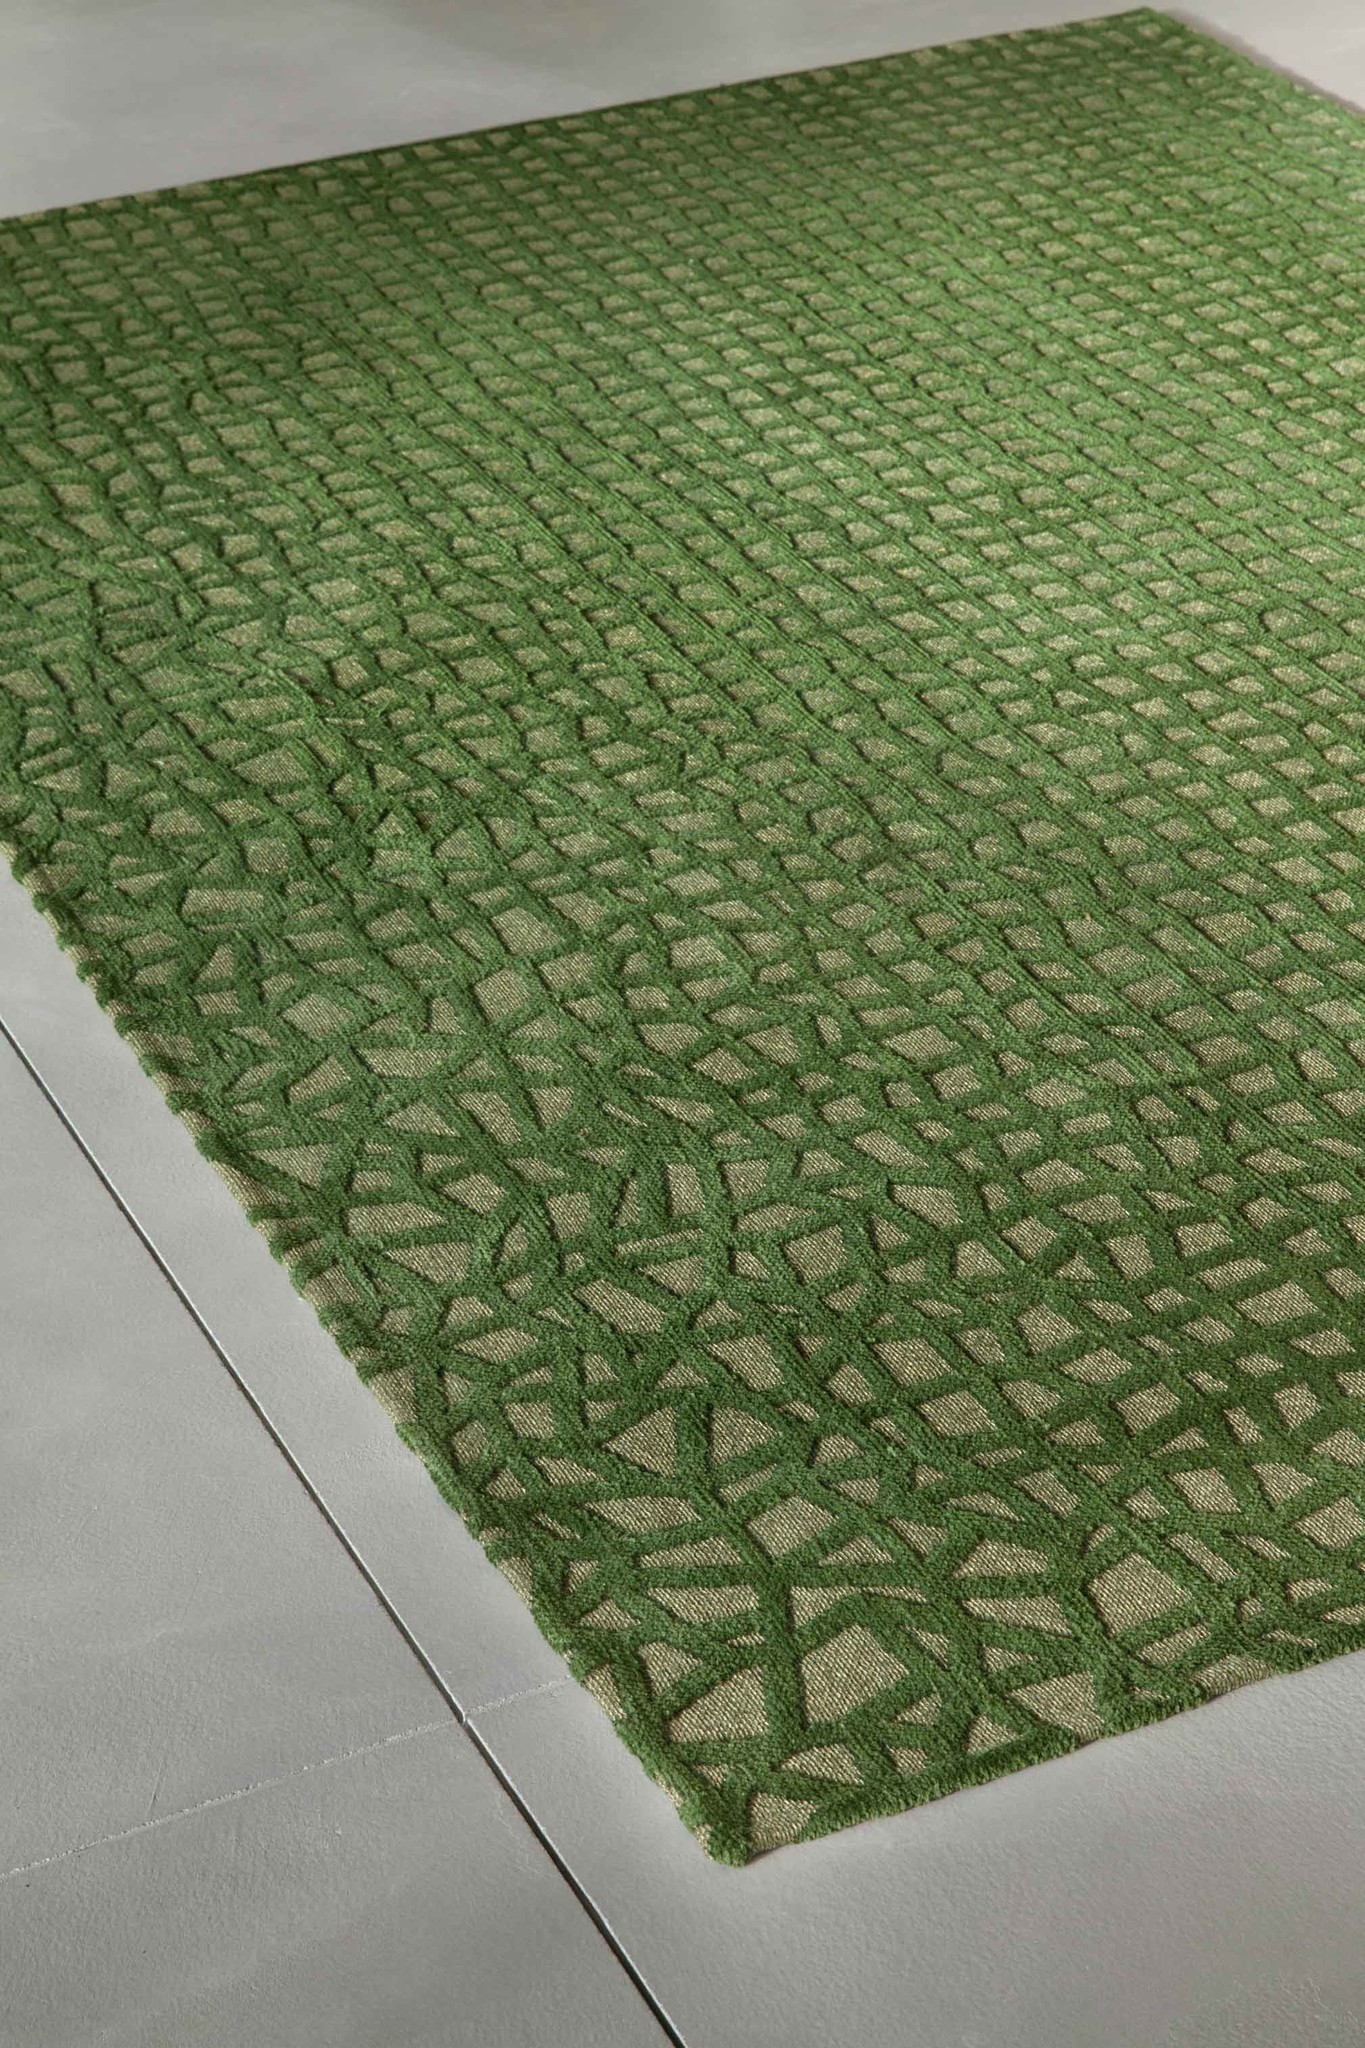 Green Checkered Flatwoven Rug ☞ Size: 6' 7" x 9' 2" (200 x 280 cm)